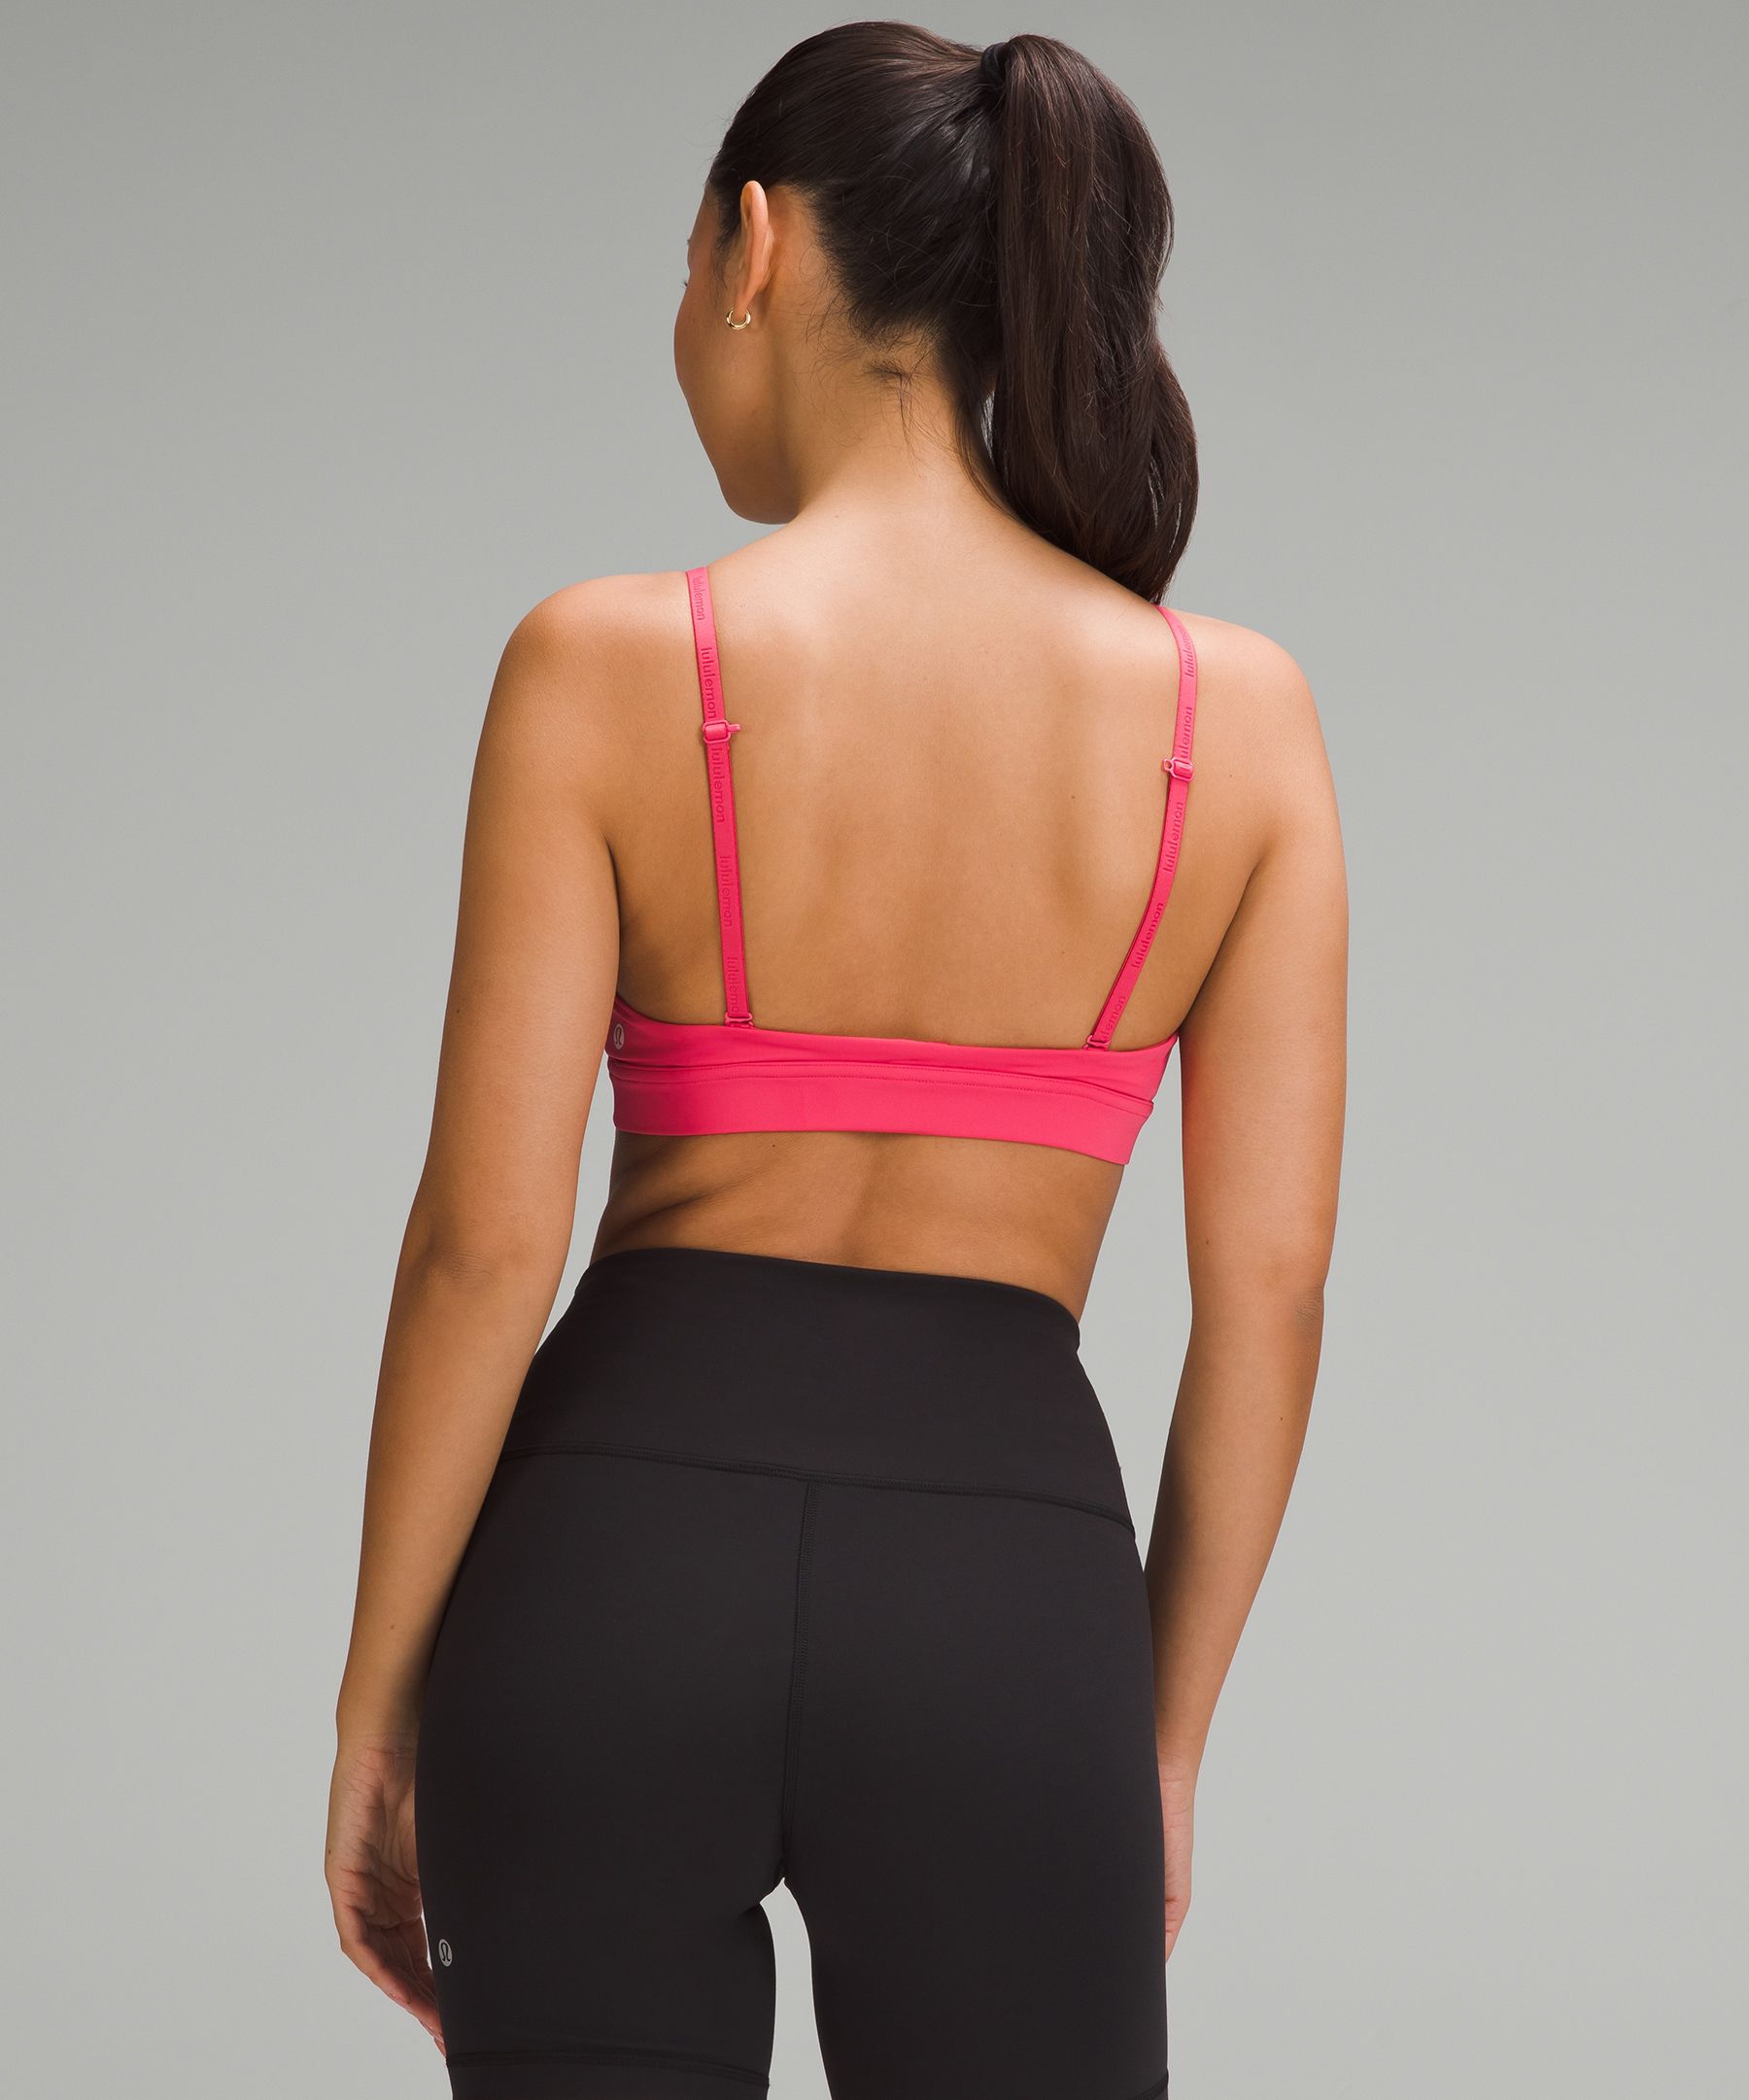 Shop Lululemon License To Train Triangle Bra Light Support, A/b Cup